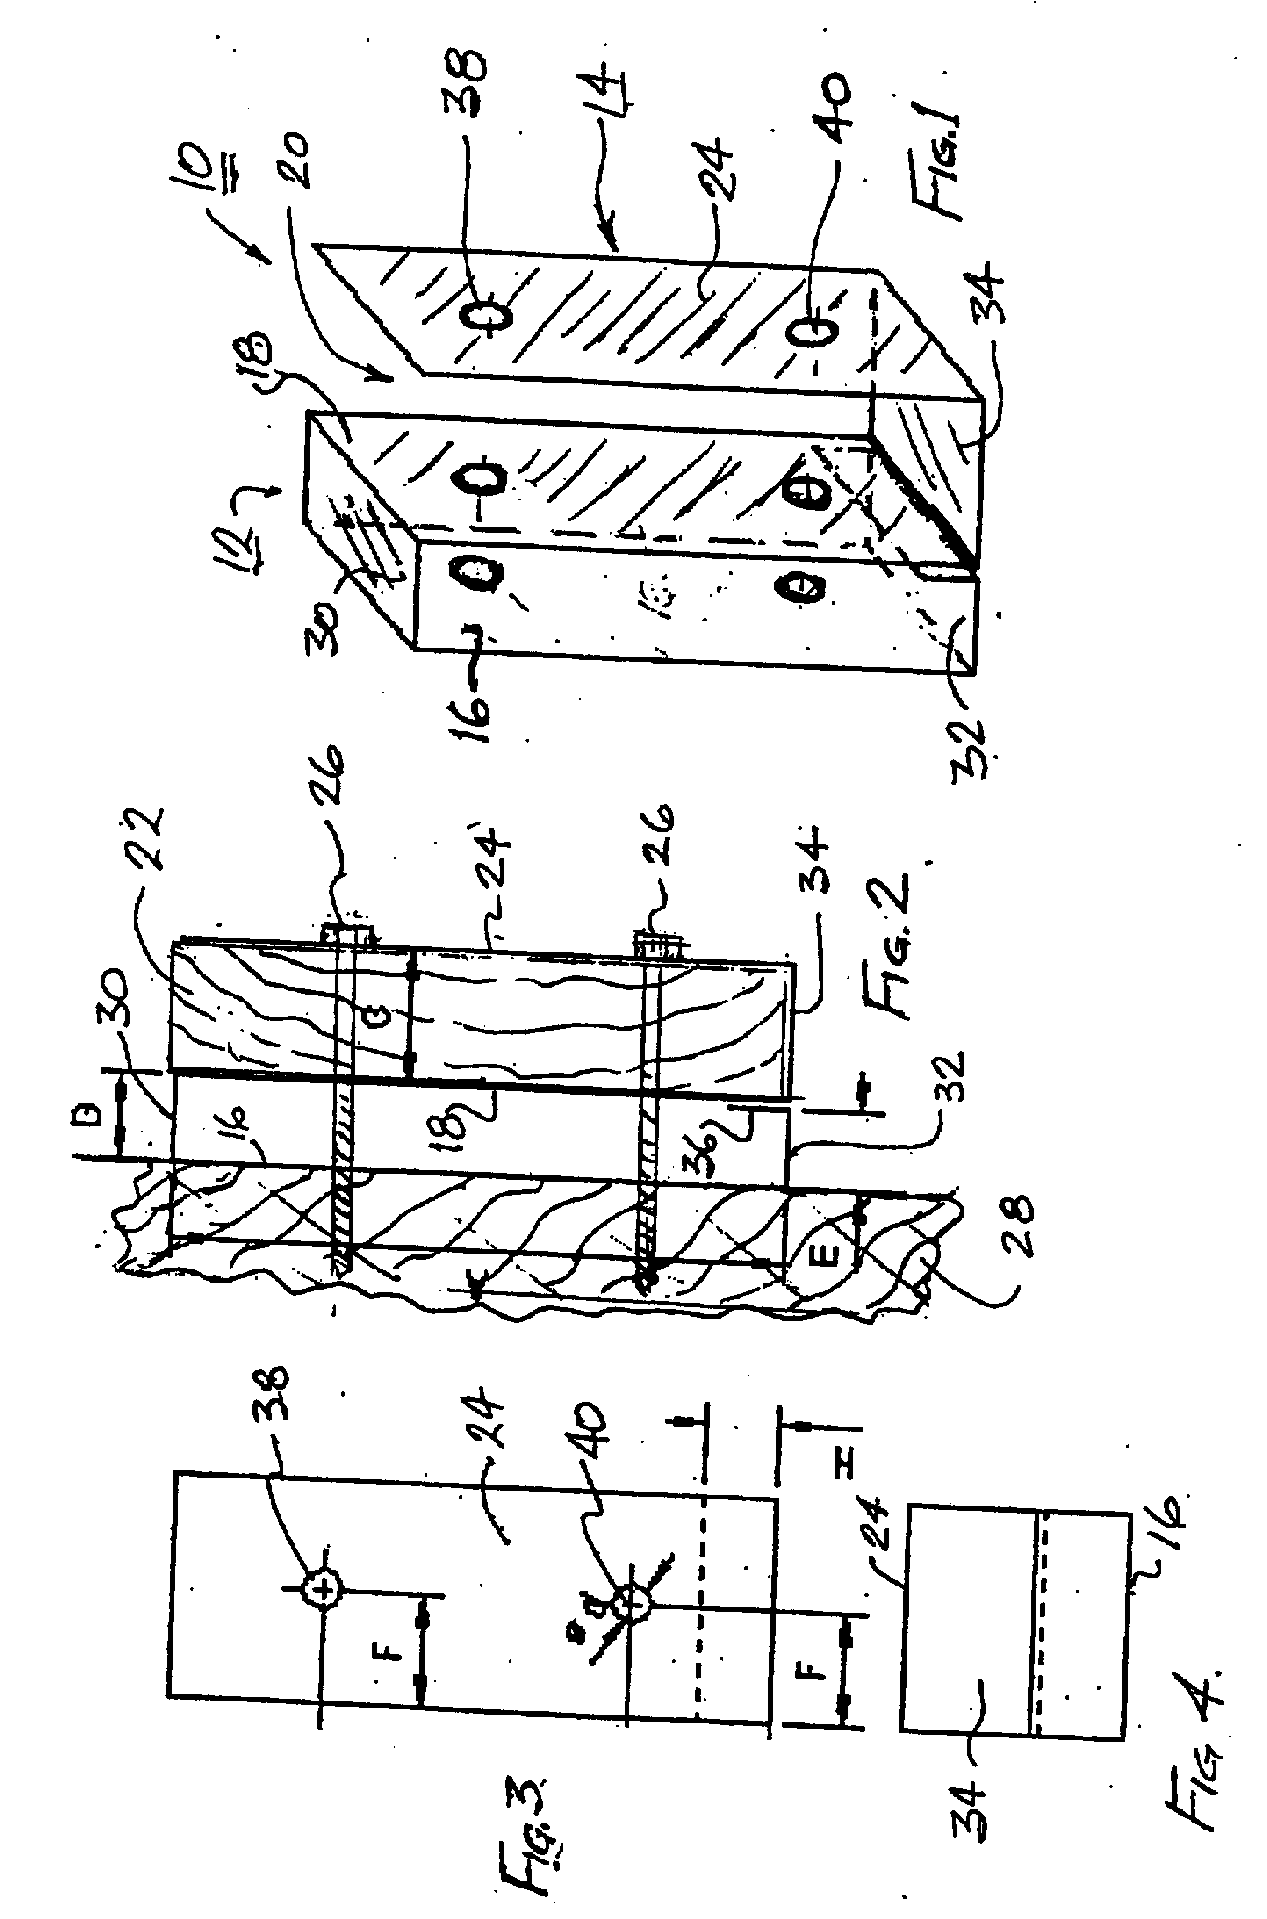 Spacer for mounting a deck ledger board to a building surface